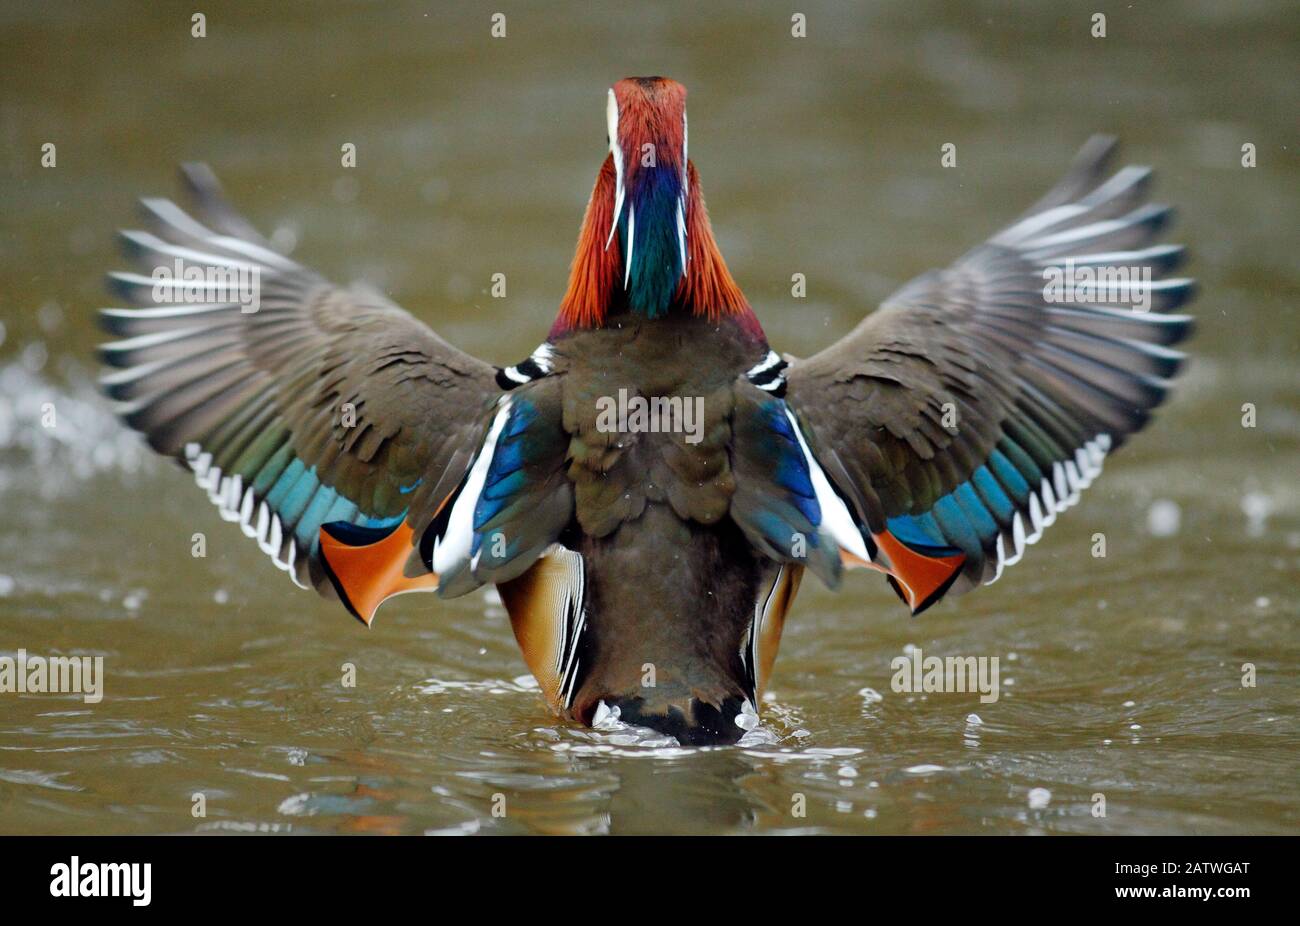 Mandarin duck drake (Aix galericulata) from behind flapping its wings. Southwest London, UK. February. Stock Photo